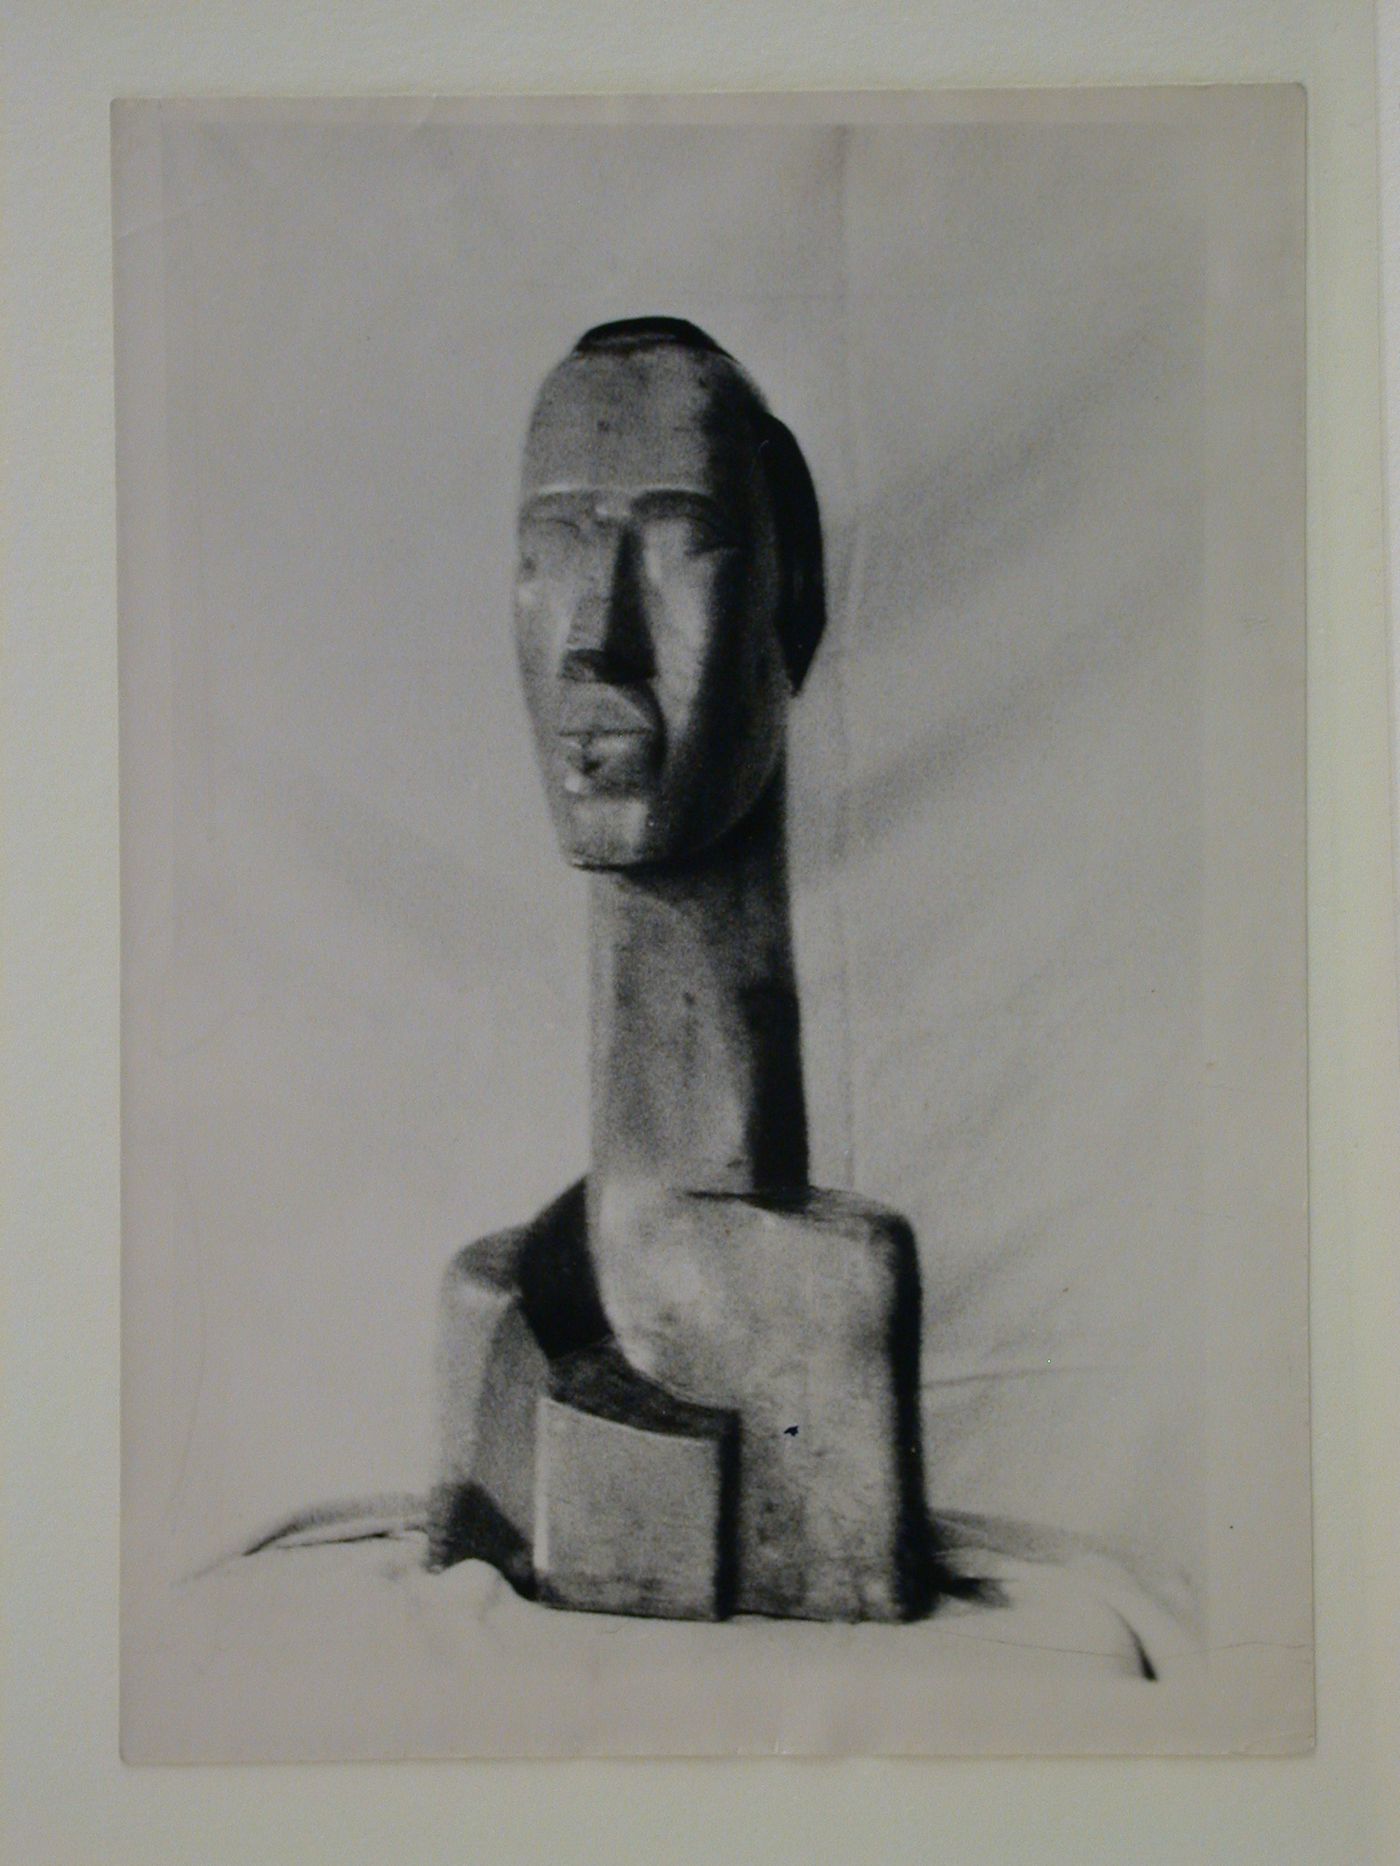 View of a sculpted bust, Soviet Union